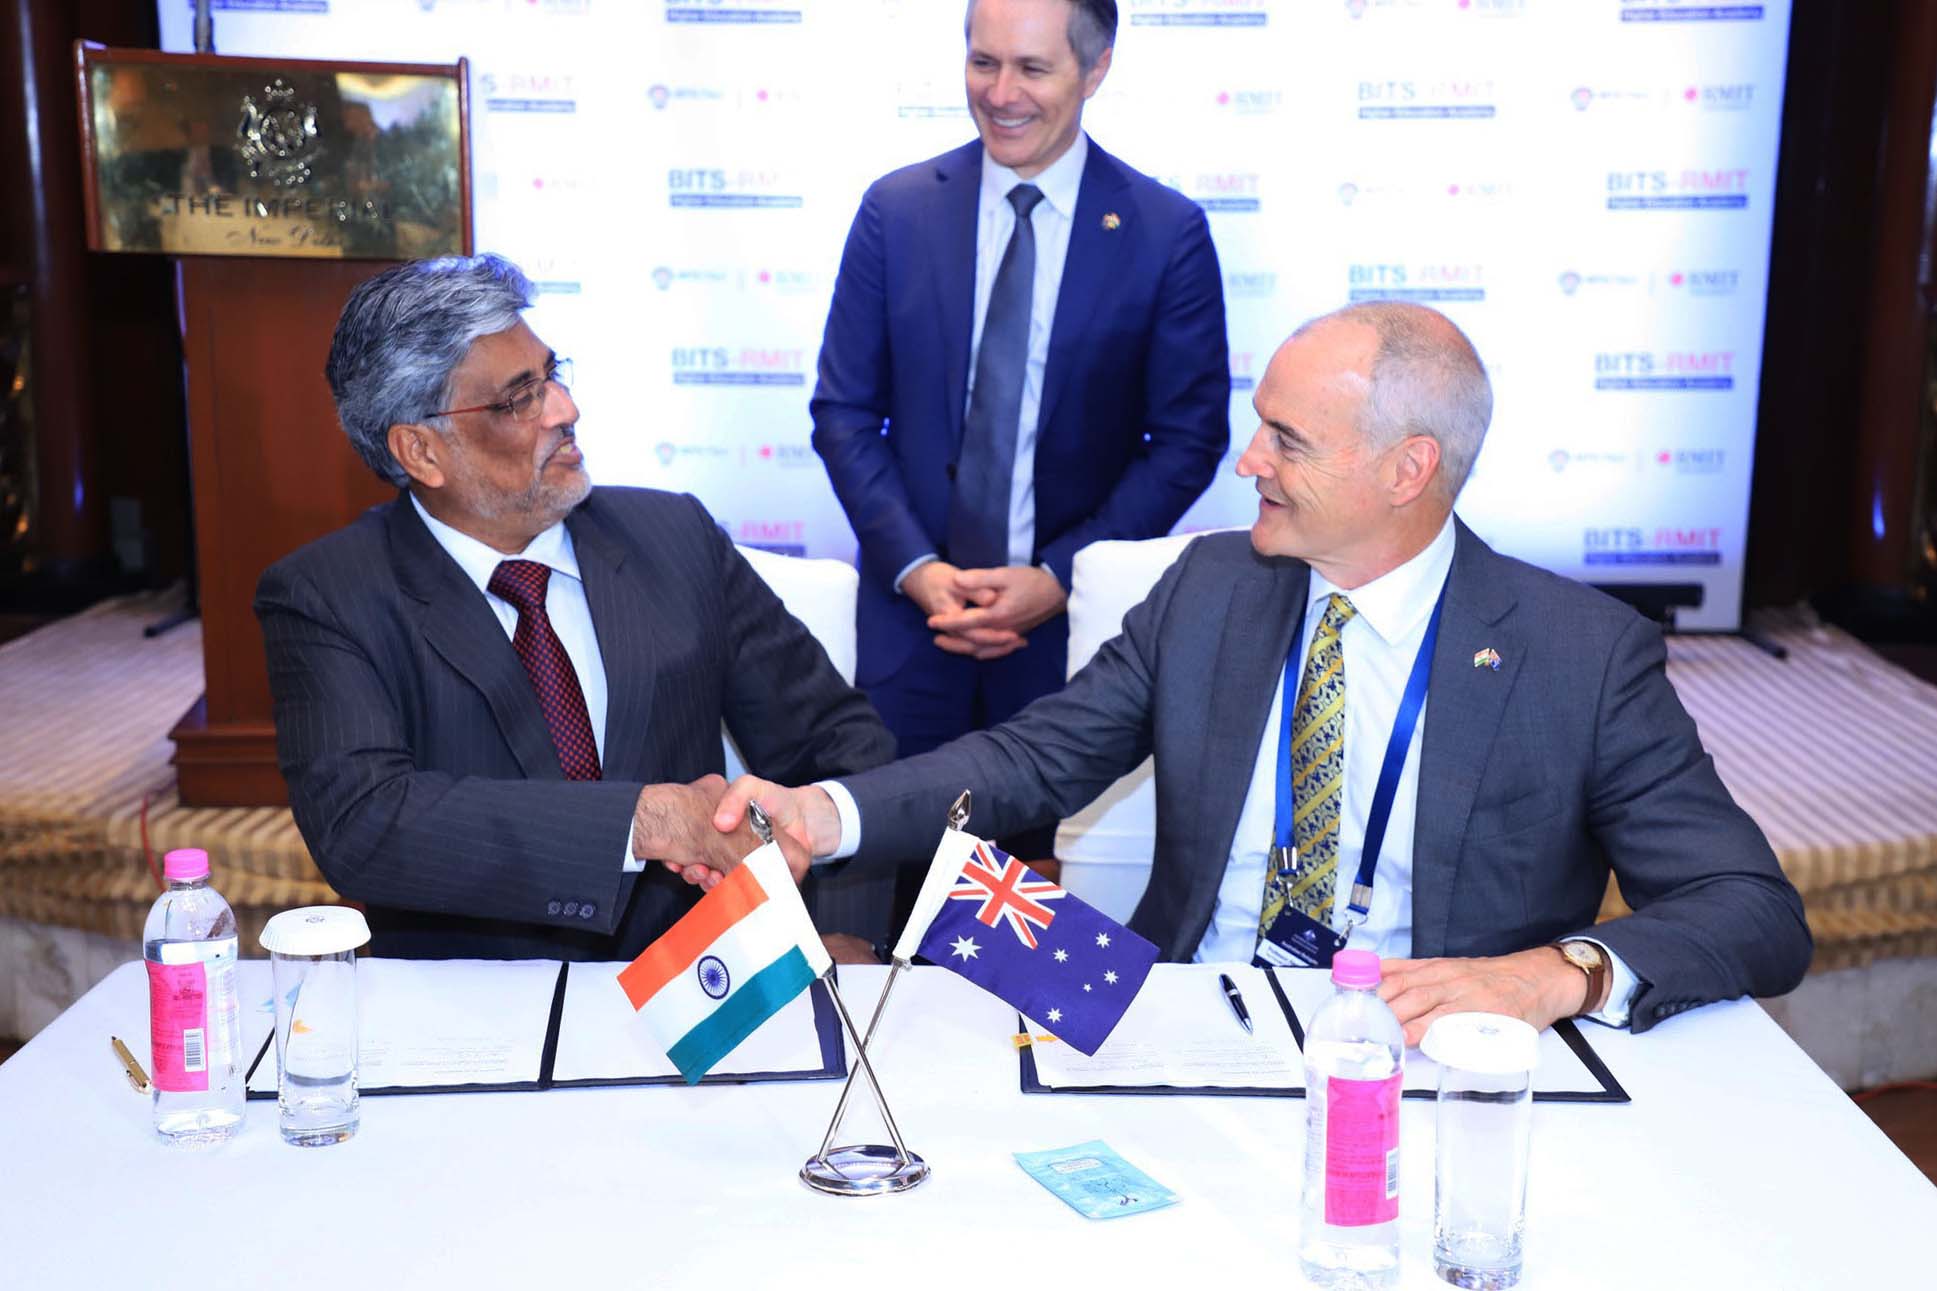 BITS Pilani collaborates with RMIT University, Australia to launch a joint Higher Education Academy